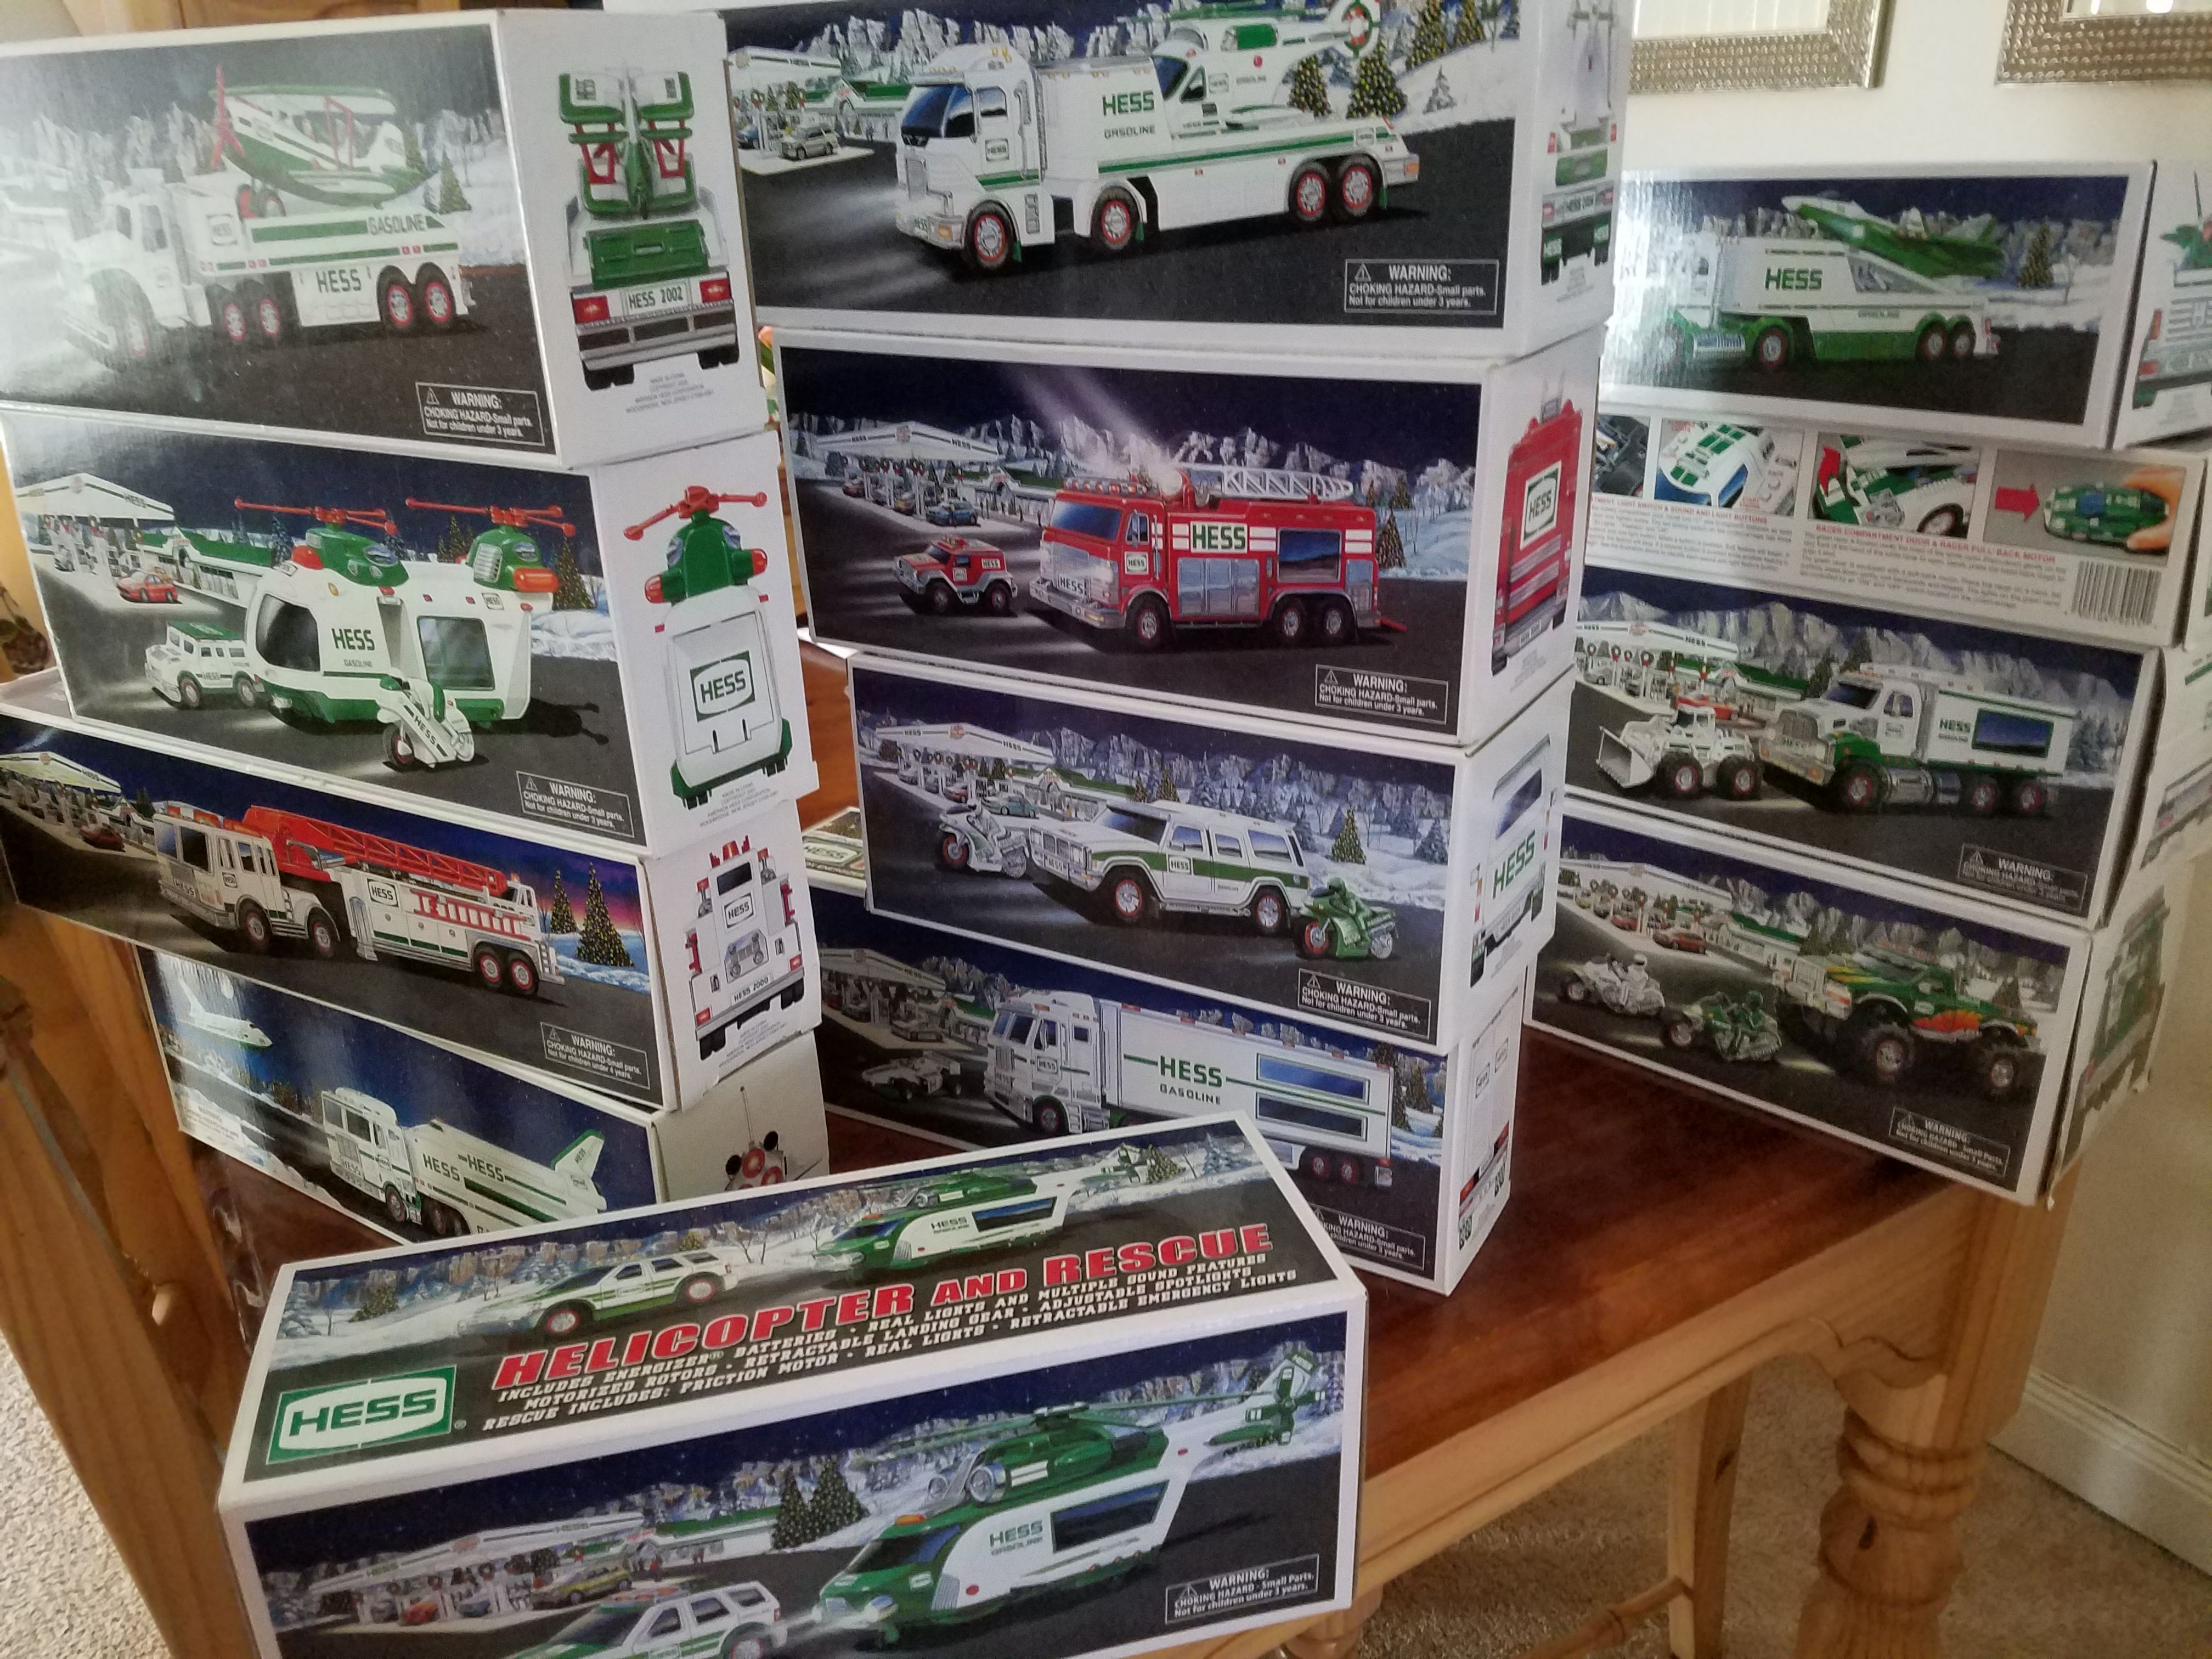 14 Hess Trucks, 1999 through 2010, 2 duplicates, most new in box. Get that special little one a Christmas present to remember. $110